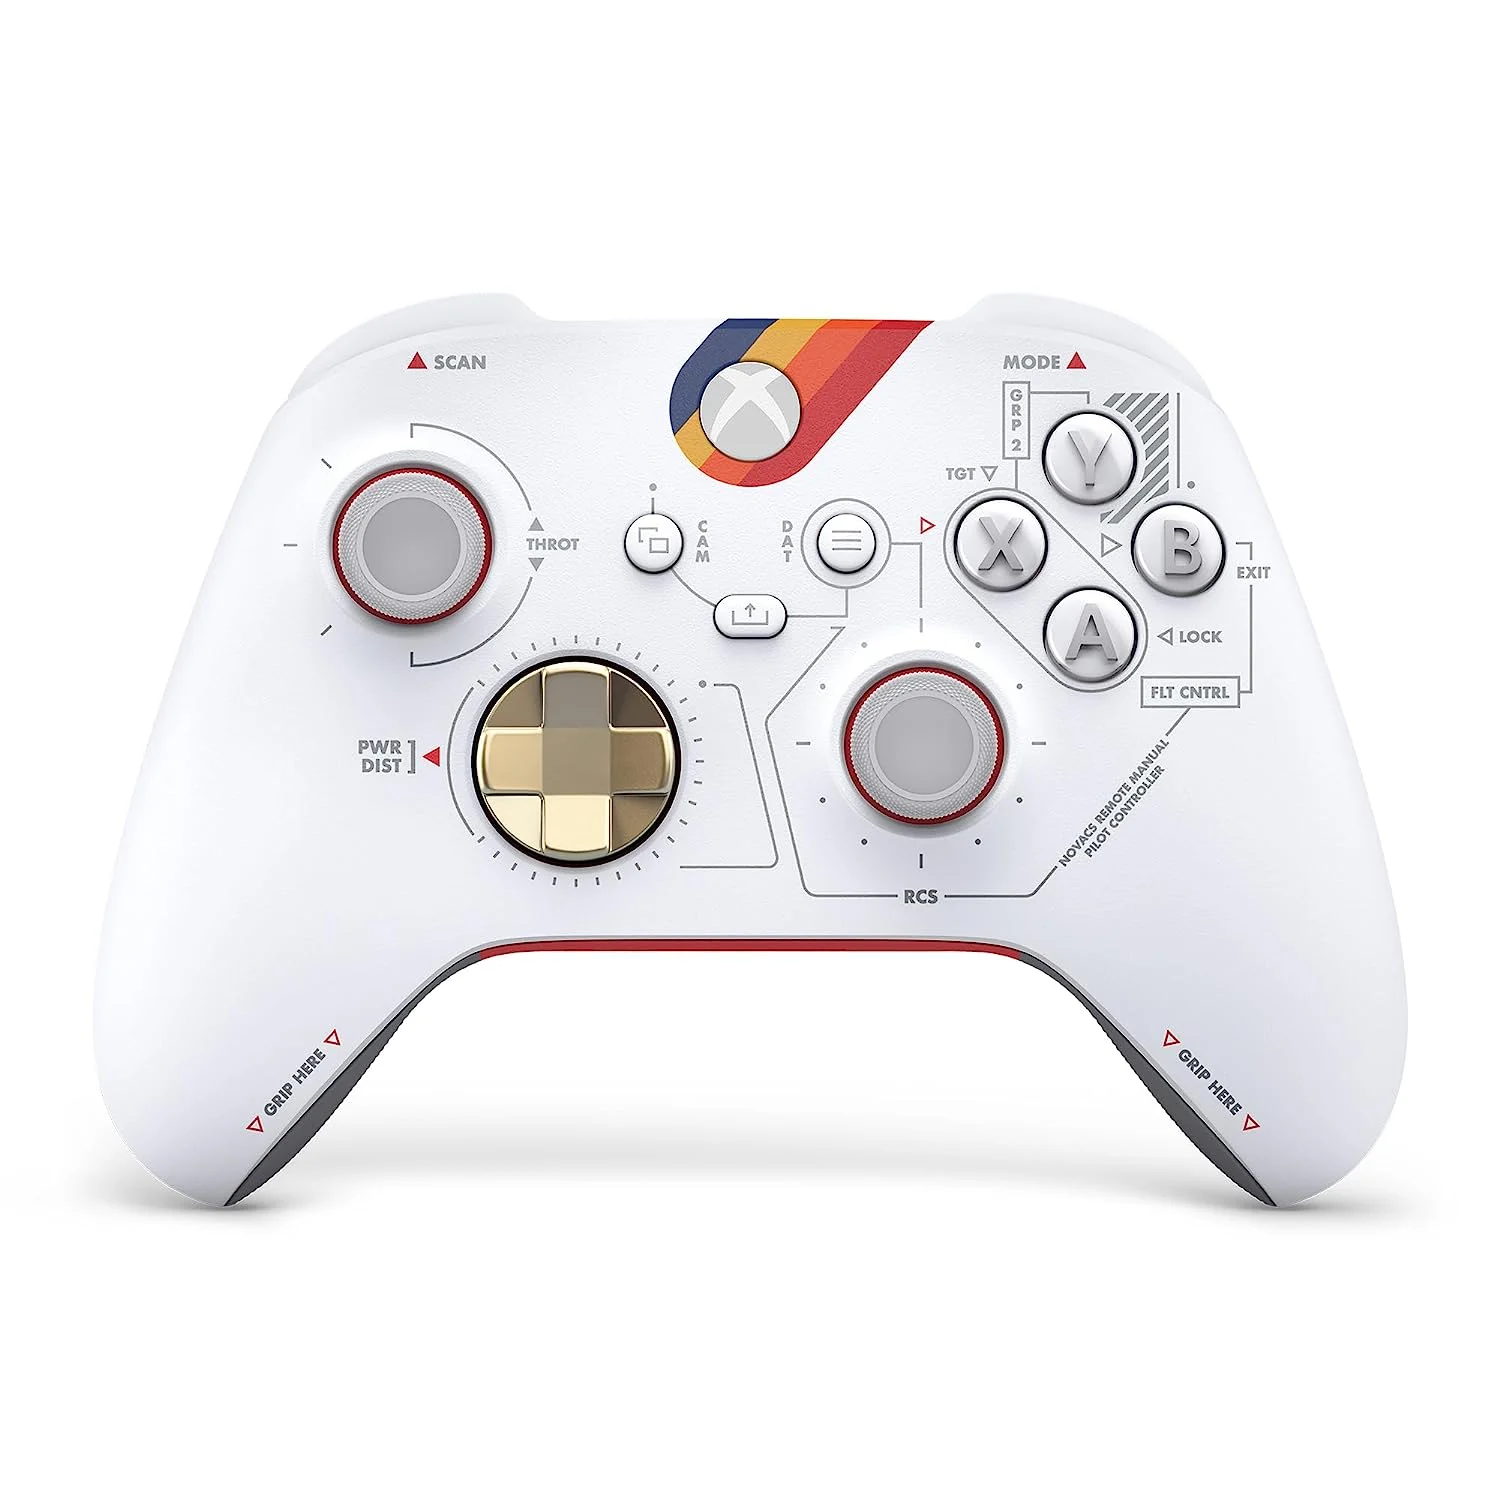 Tay cầm chơi game Xbox Series Wireless Controller – Starfield Limited Edition